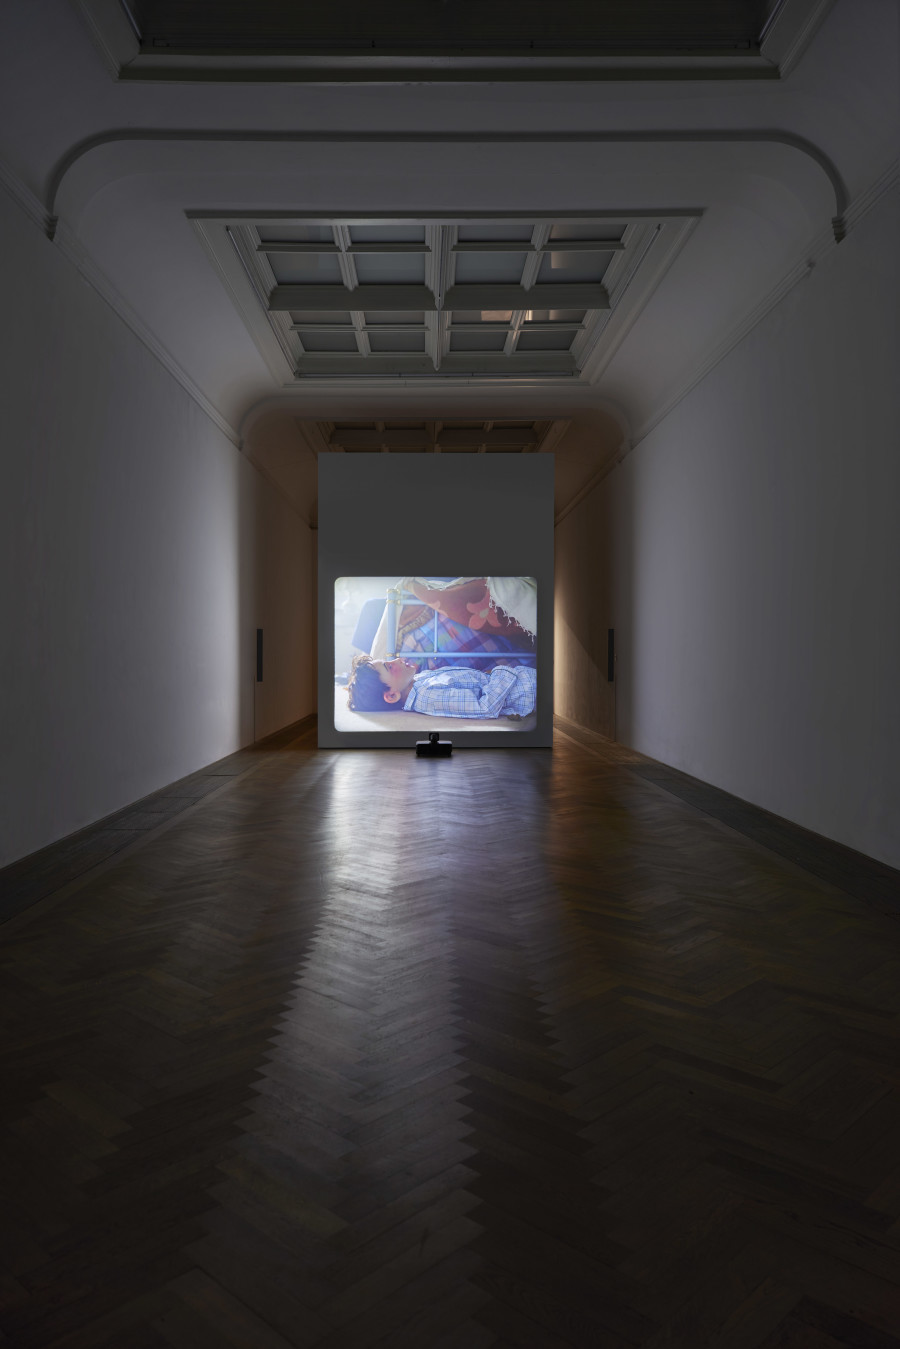 Diego Marcon, The Parents’ Room, 2021, installation view, in: Diego Marcon, Have You Checked the Children, Kunsthalle Basel, 2023, photo: Philipp Hänger / Kunsthalle Basel